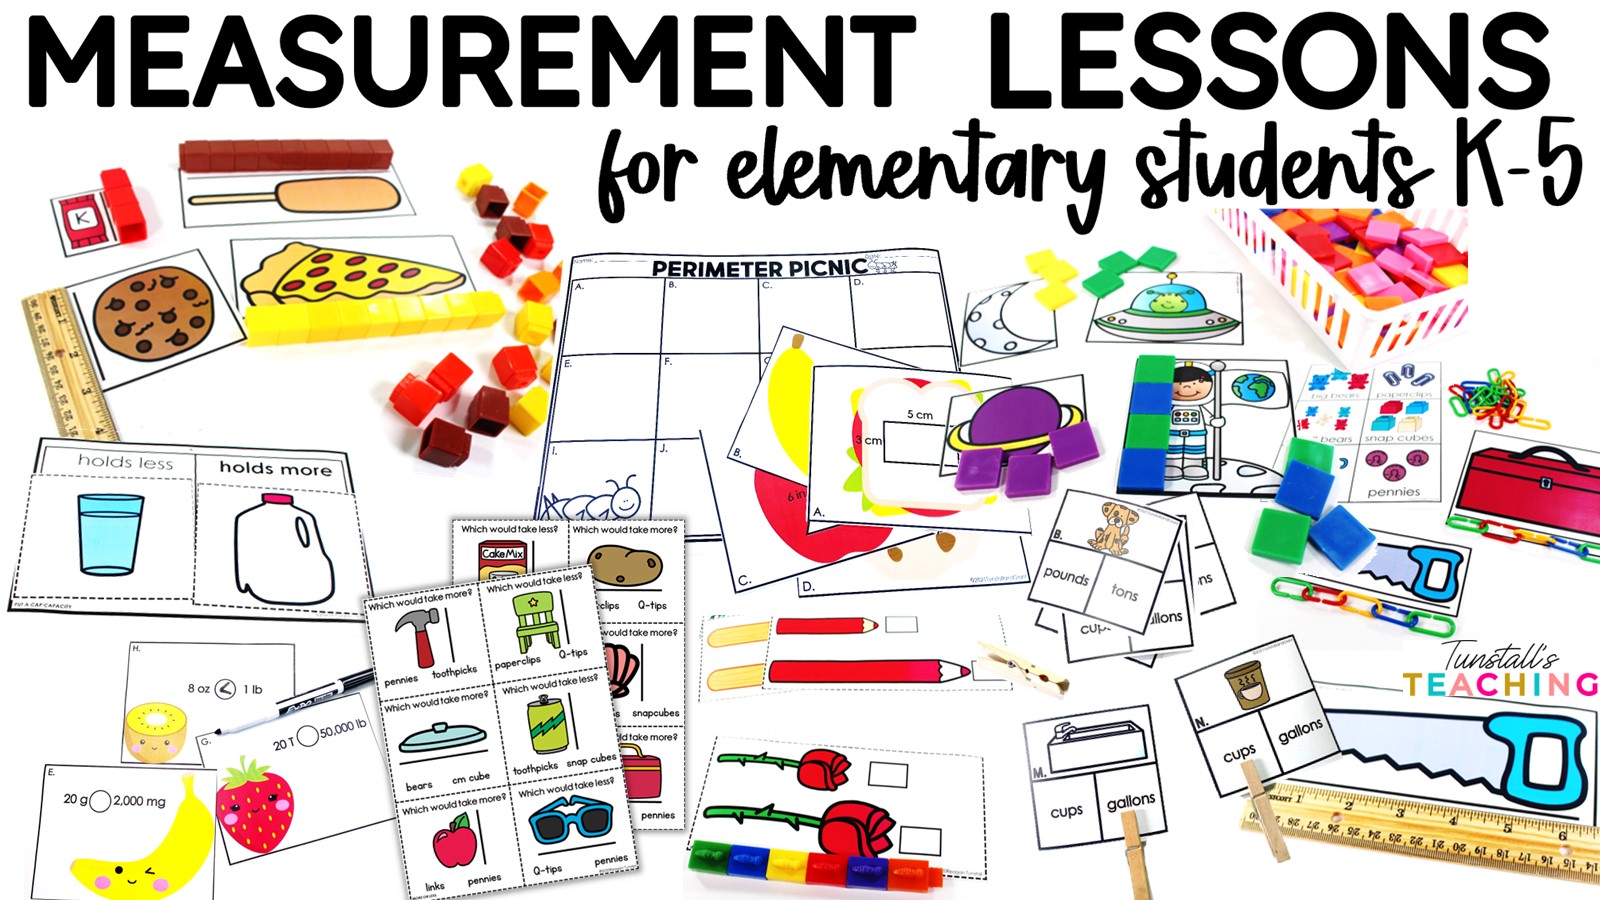 Measurement Lessons for Elementary Students K-5